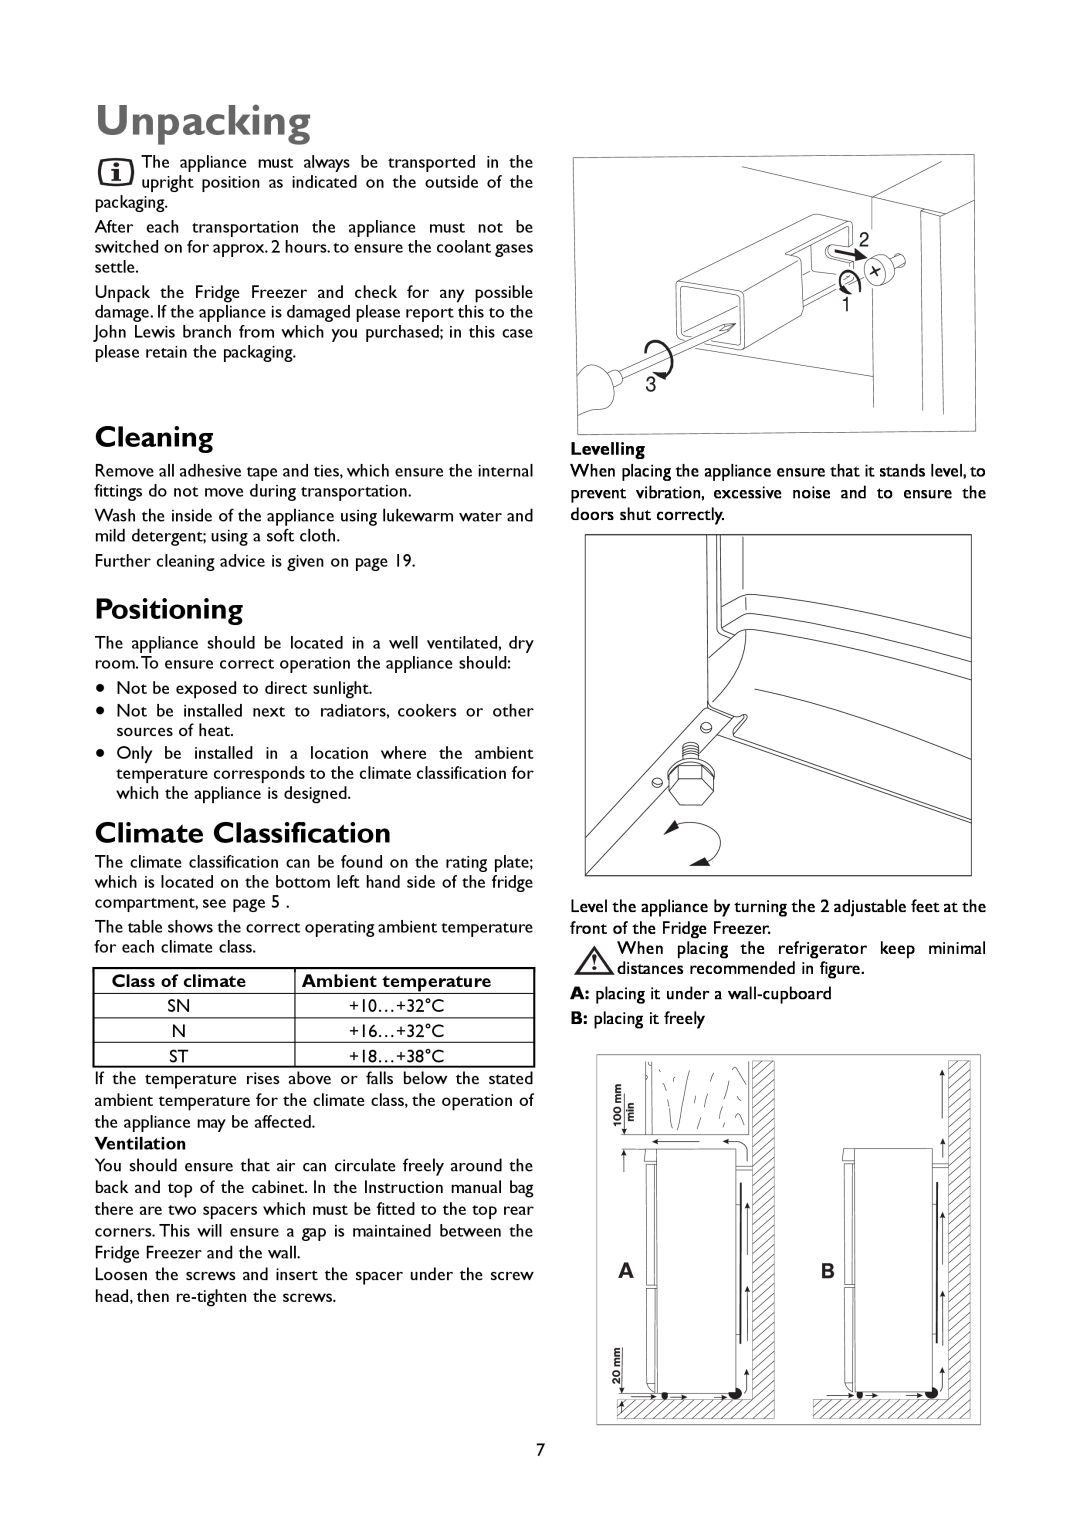 John Lewis JLFFW2005 instruction manual Unpacking, Cleaning, Positioning, Climate Classification 